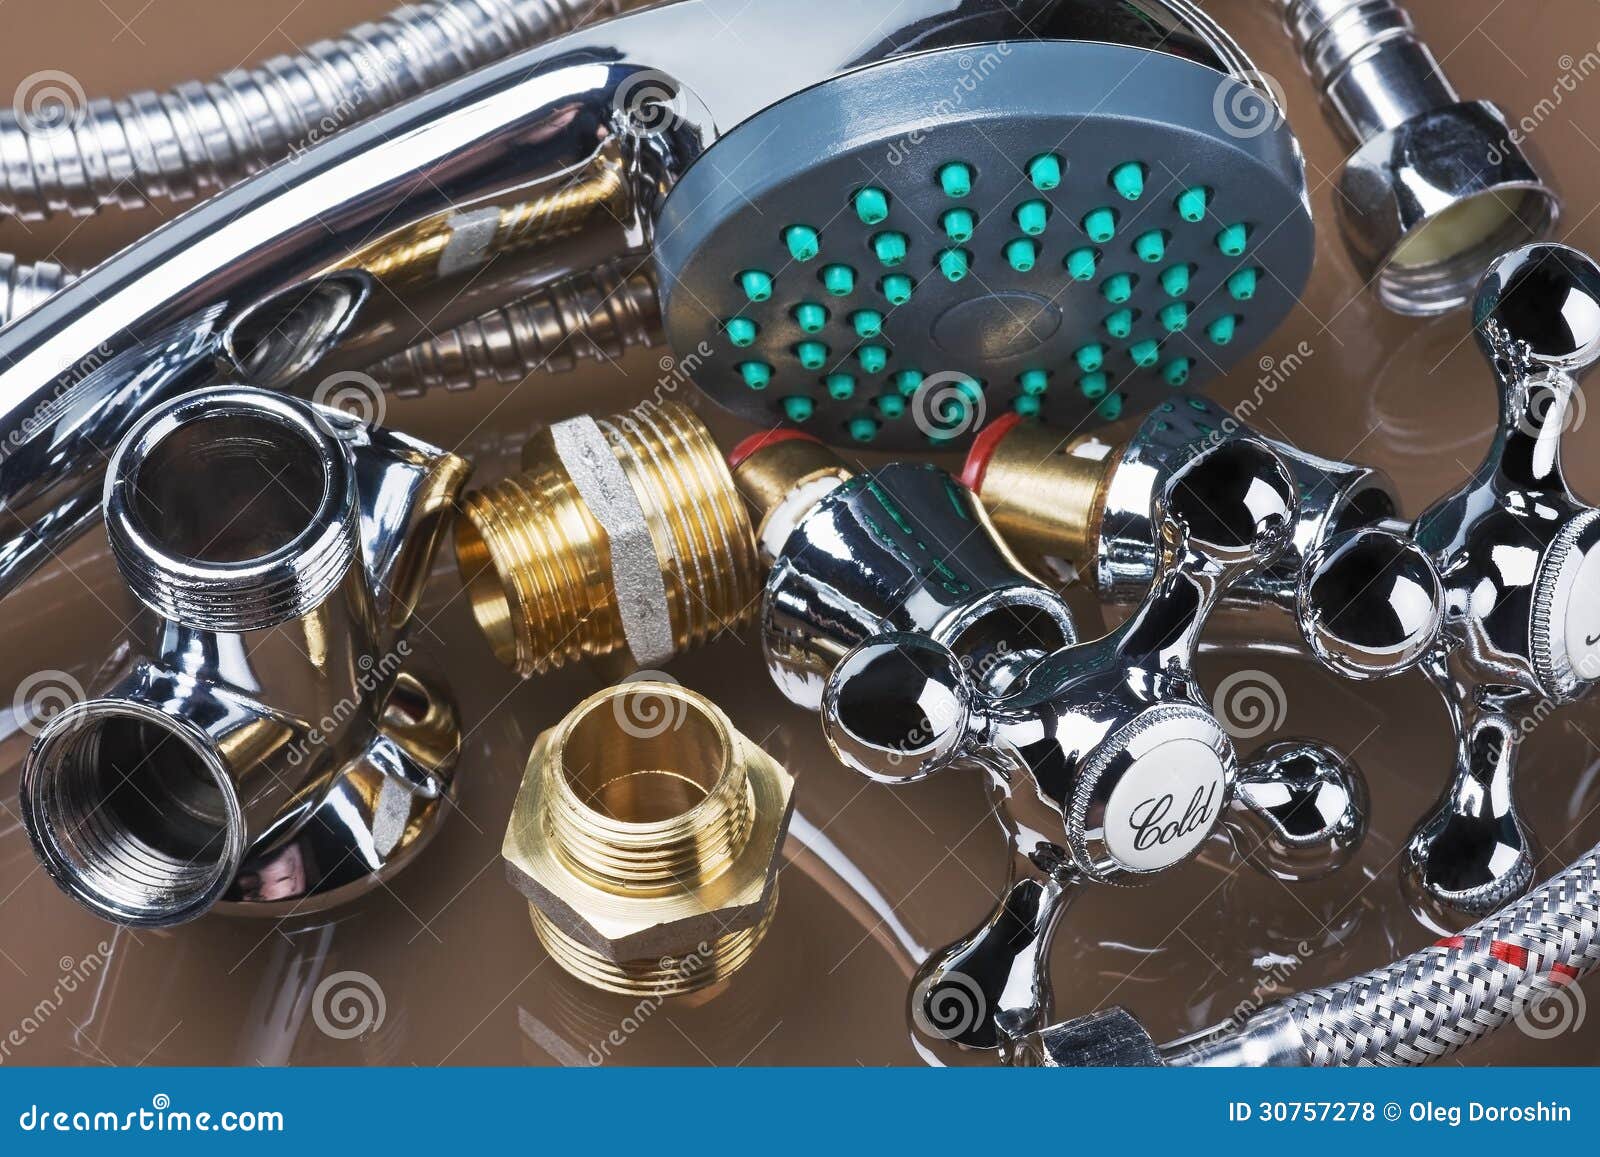 Bathroom Fixtures And Fittings Stock Photo Image Of Mechanical